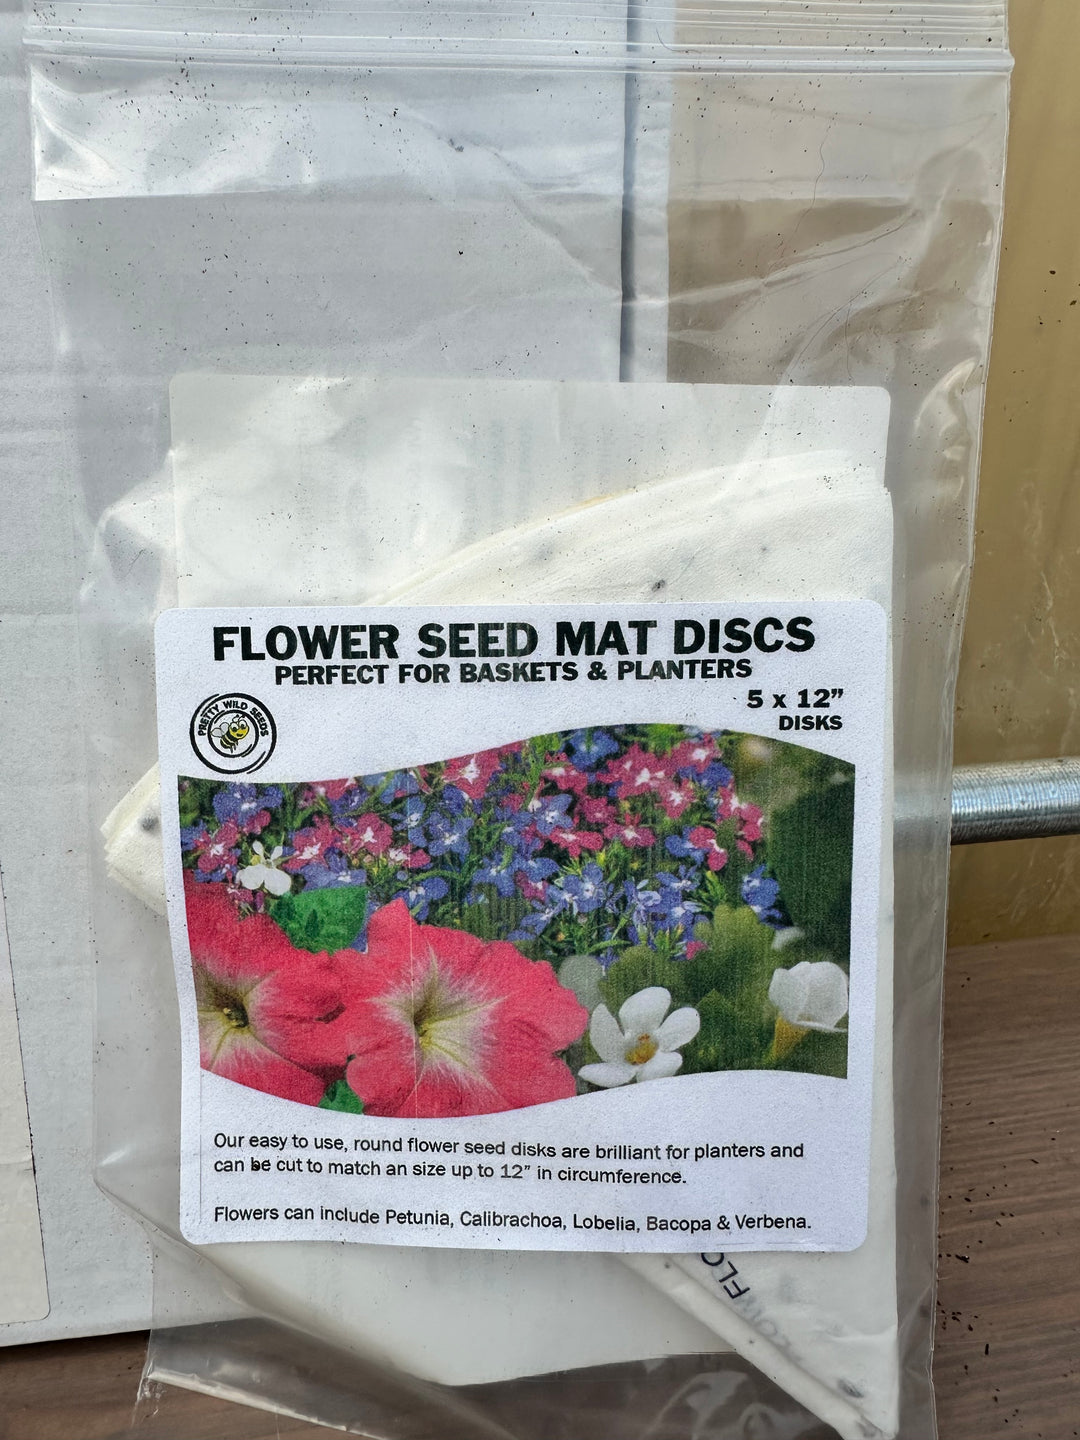 Pretty Wild Seed Competition May